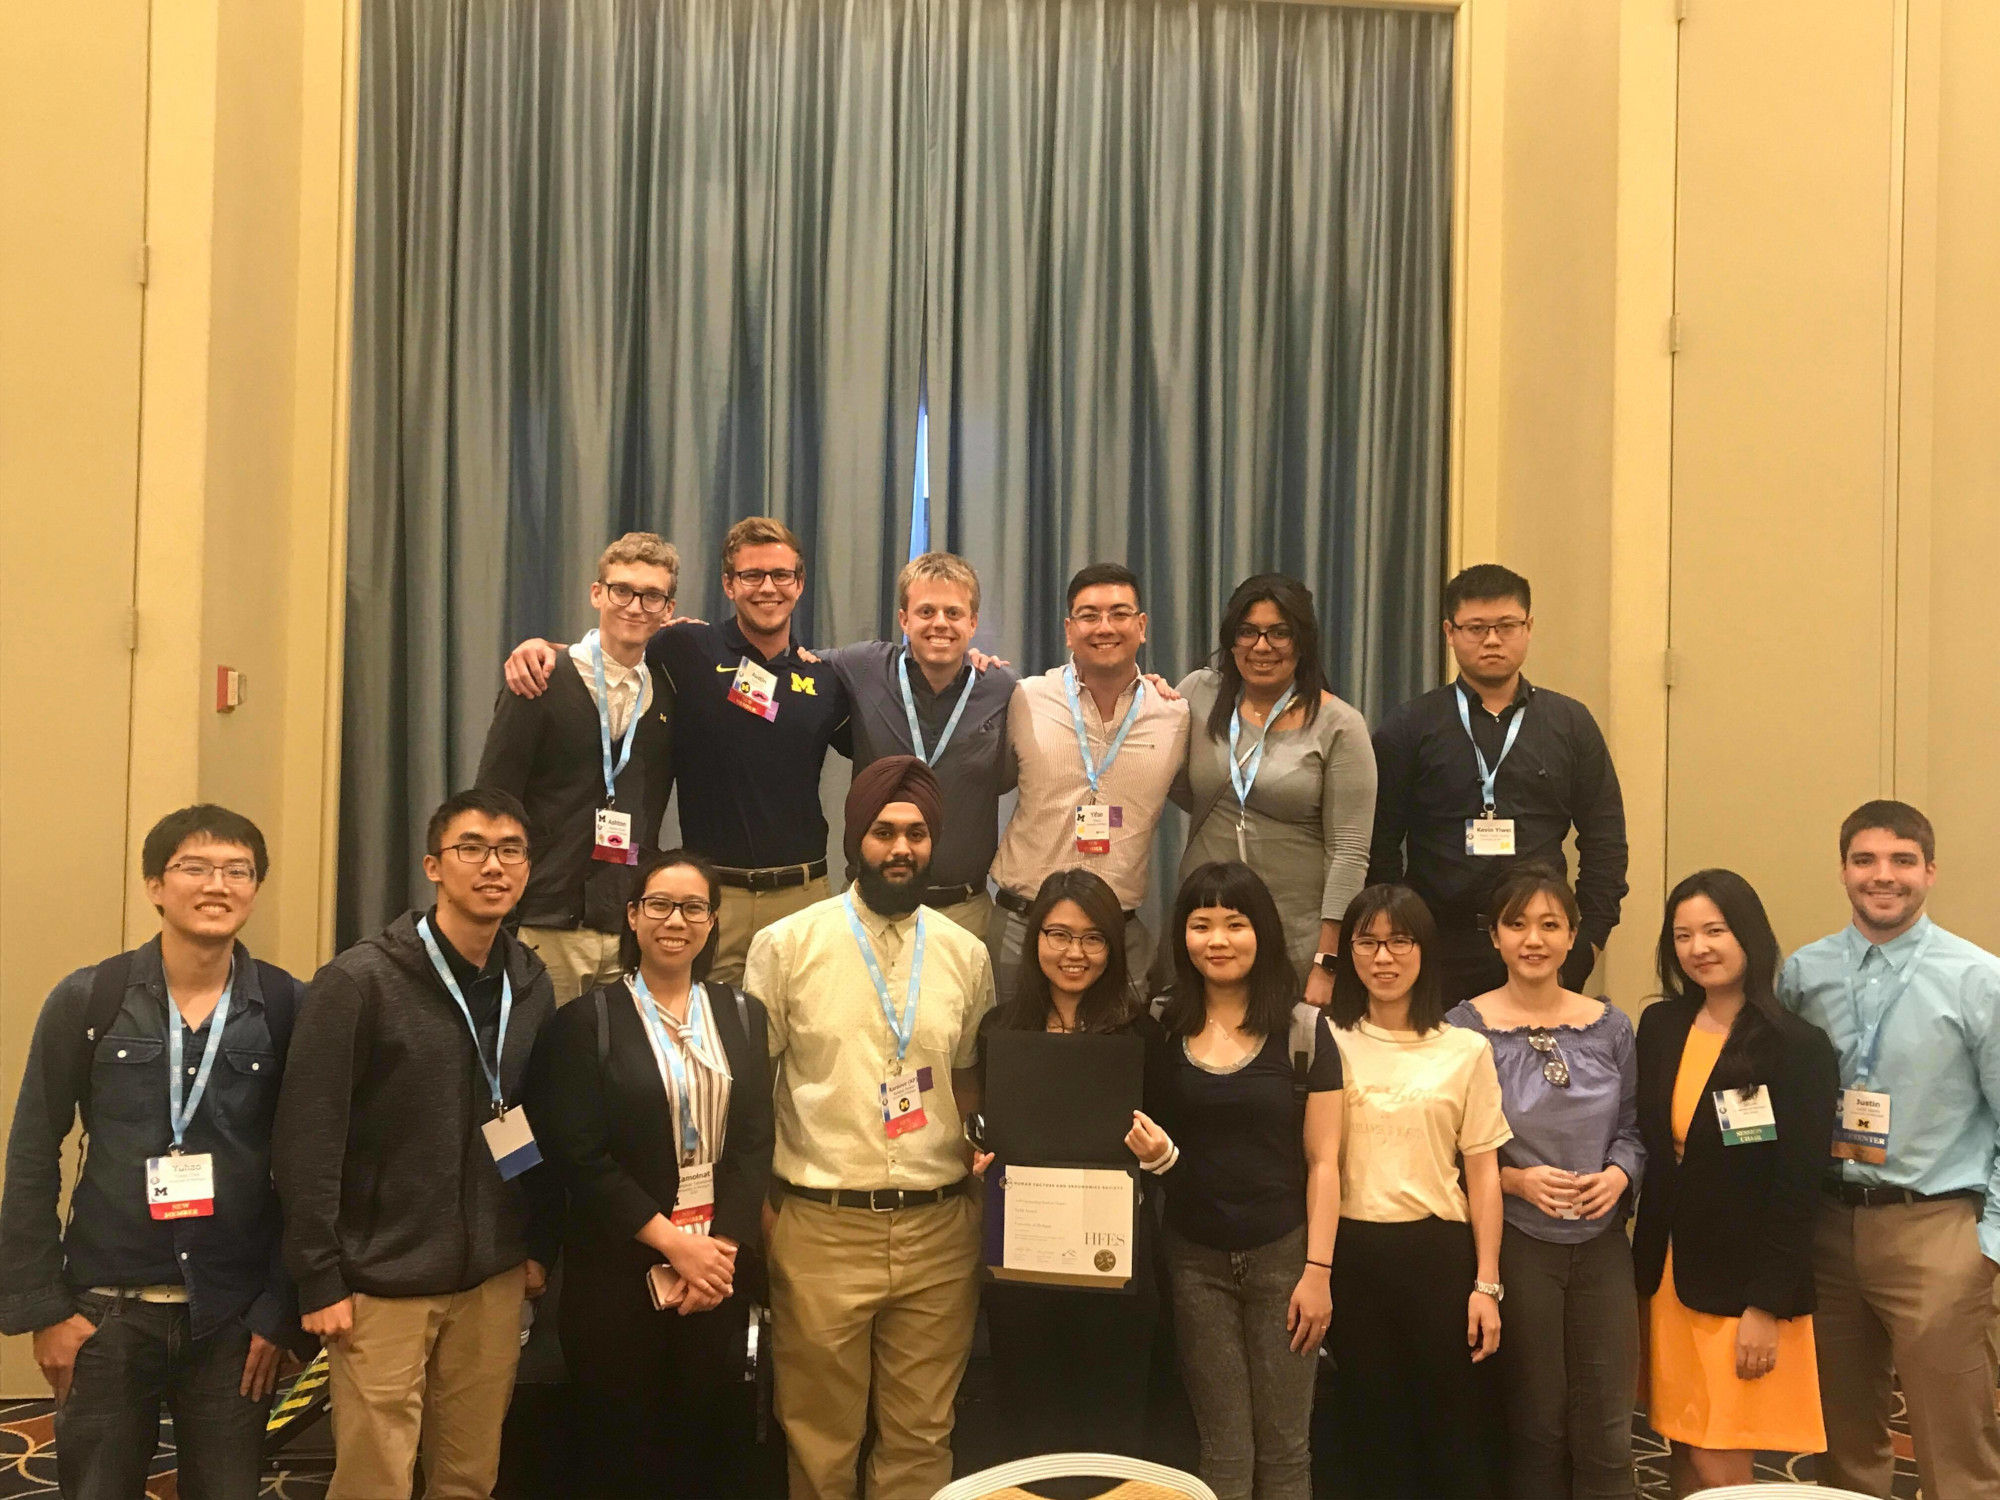 HFES Chapter at HFES 2019